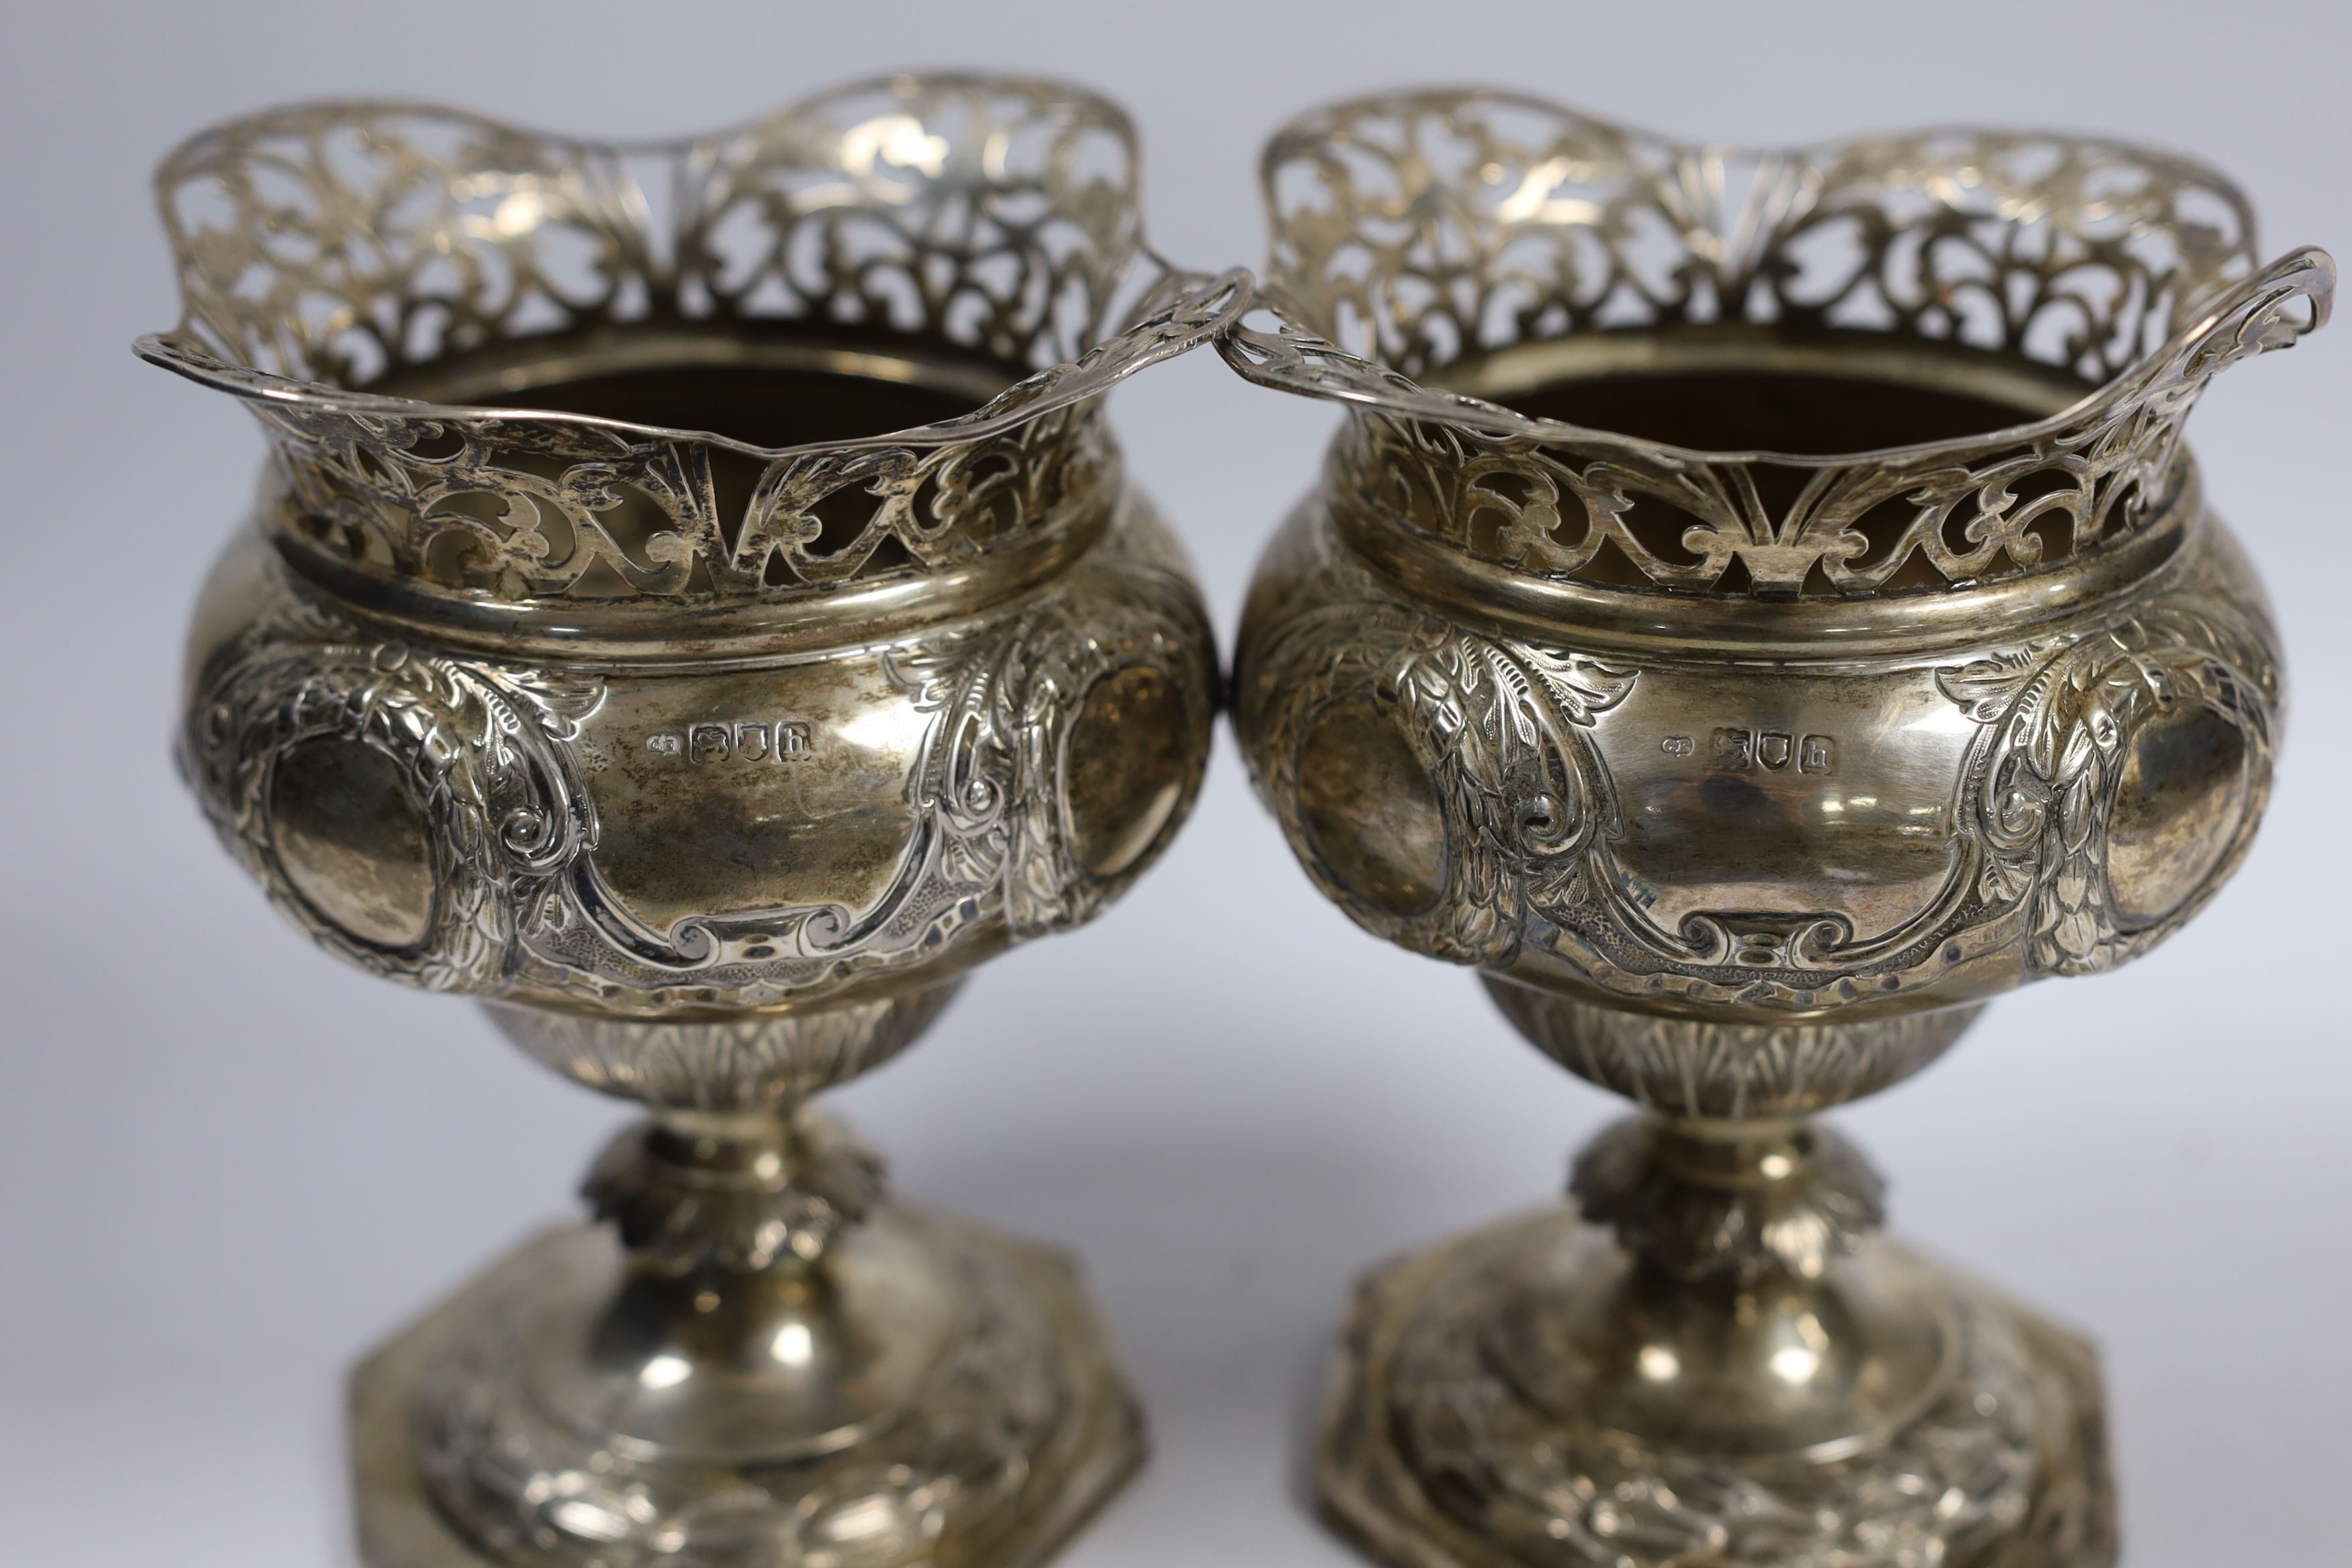 A pair of Edwardian silver pedestal vases, with pierced borders, Charles Edwards, London, 1903 height 15.8cm, 19.8oz.